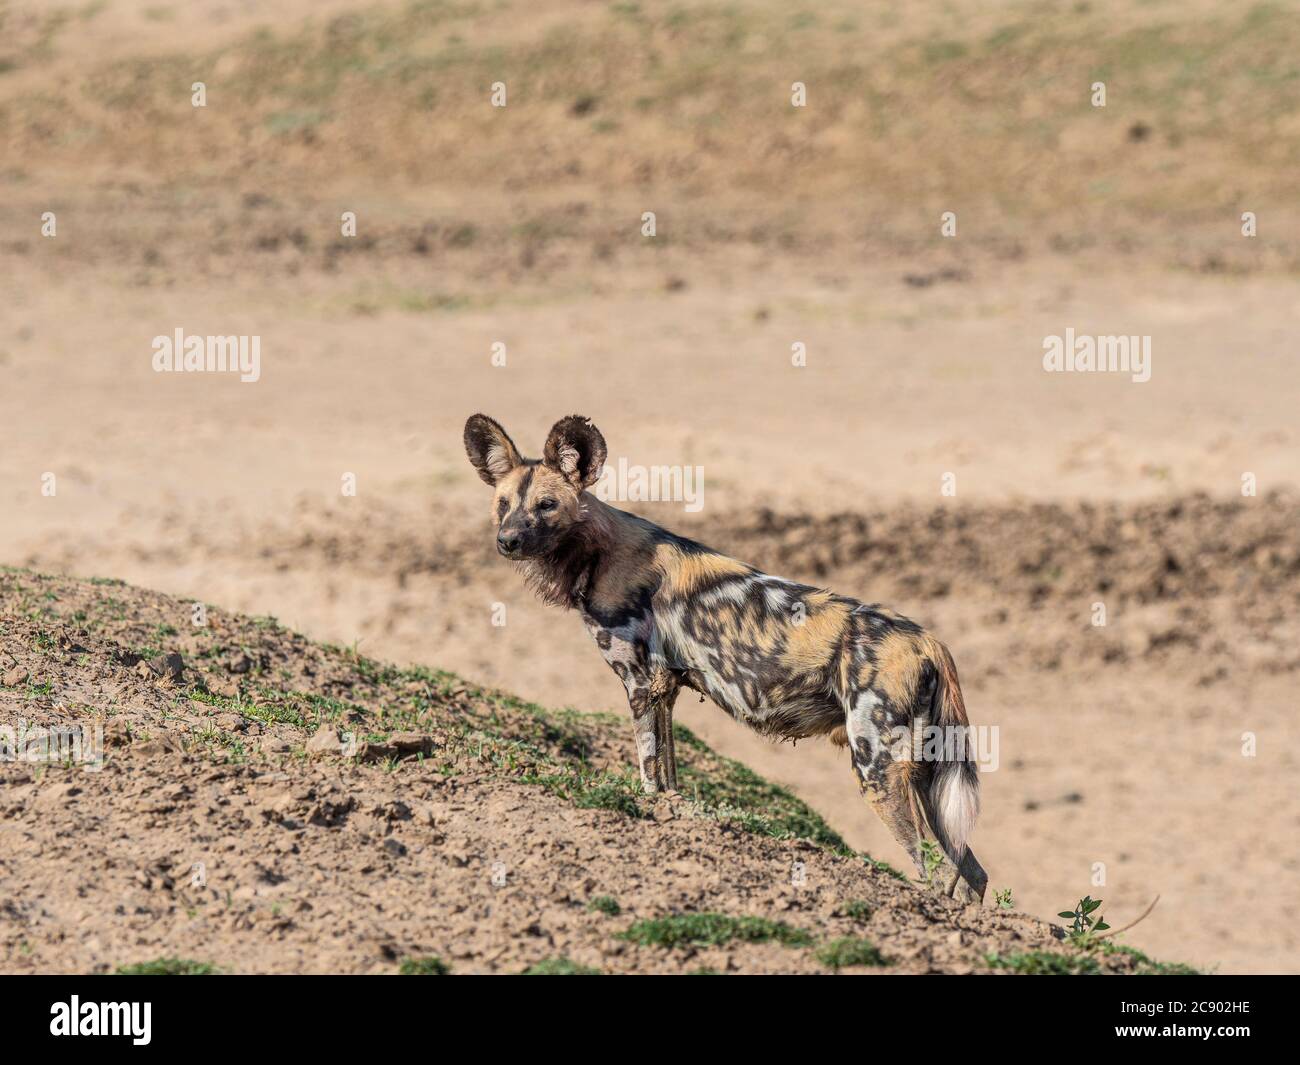 A Cape wild dog, Lycaon pictus pictus, listed as Endangered, South Luangwa National Park, Zambia, Stock Photo